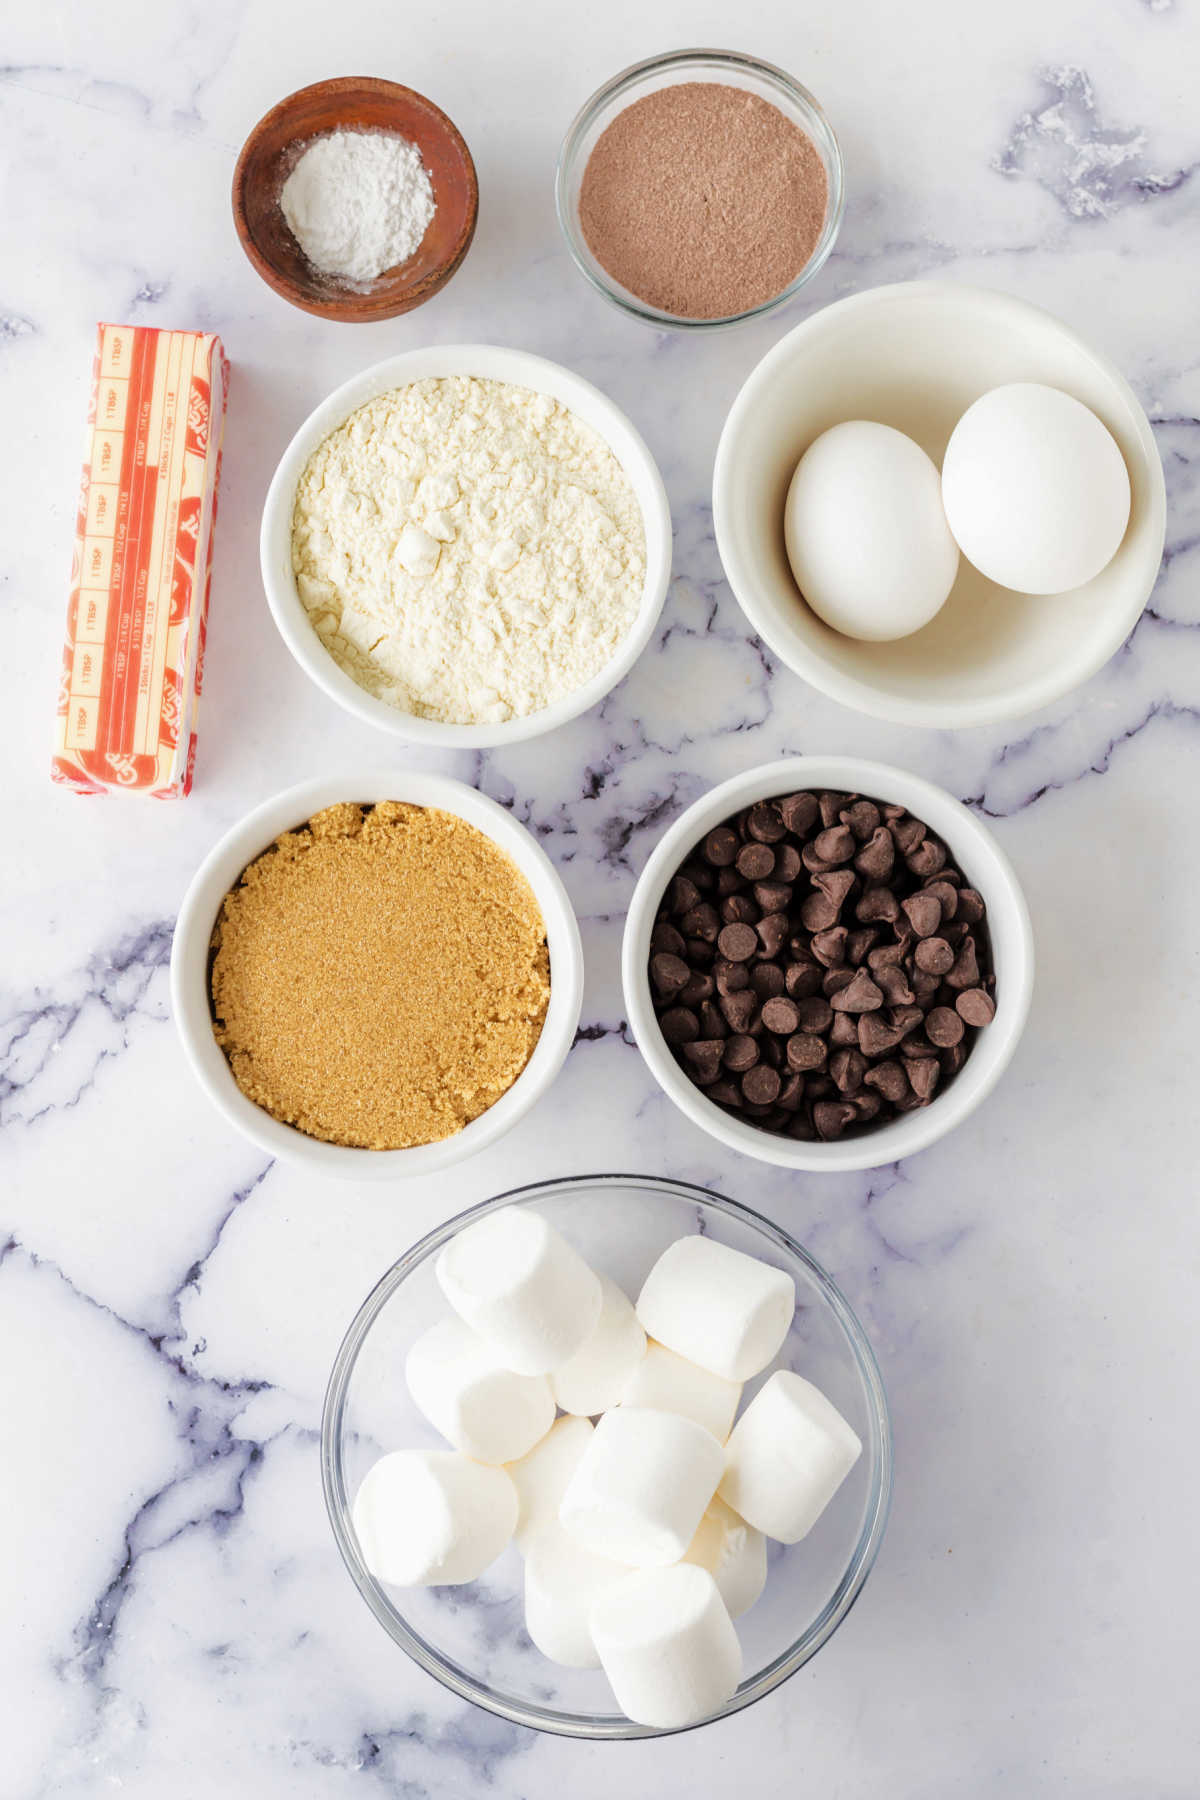 Ingredients including butter, chocolate chips, brown sugar, flour, eggs, hot cocoa mix, baking powder, and marshmallows ready to be made into hot chocolate cookies.